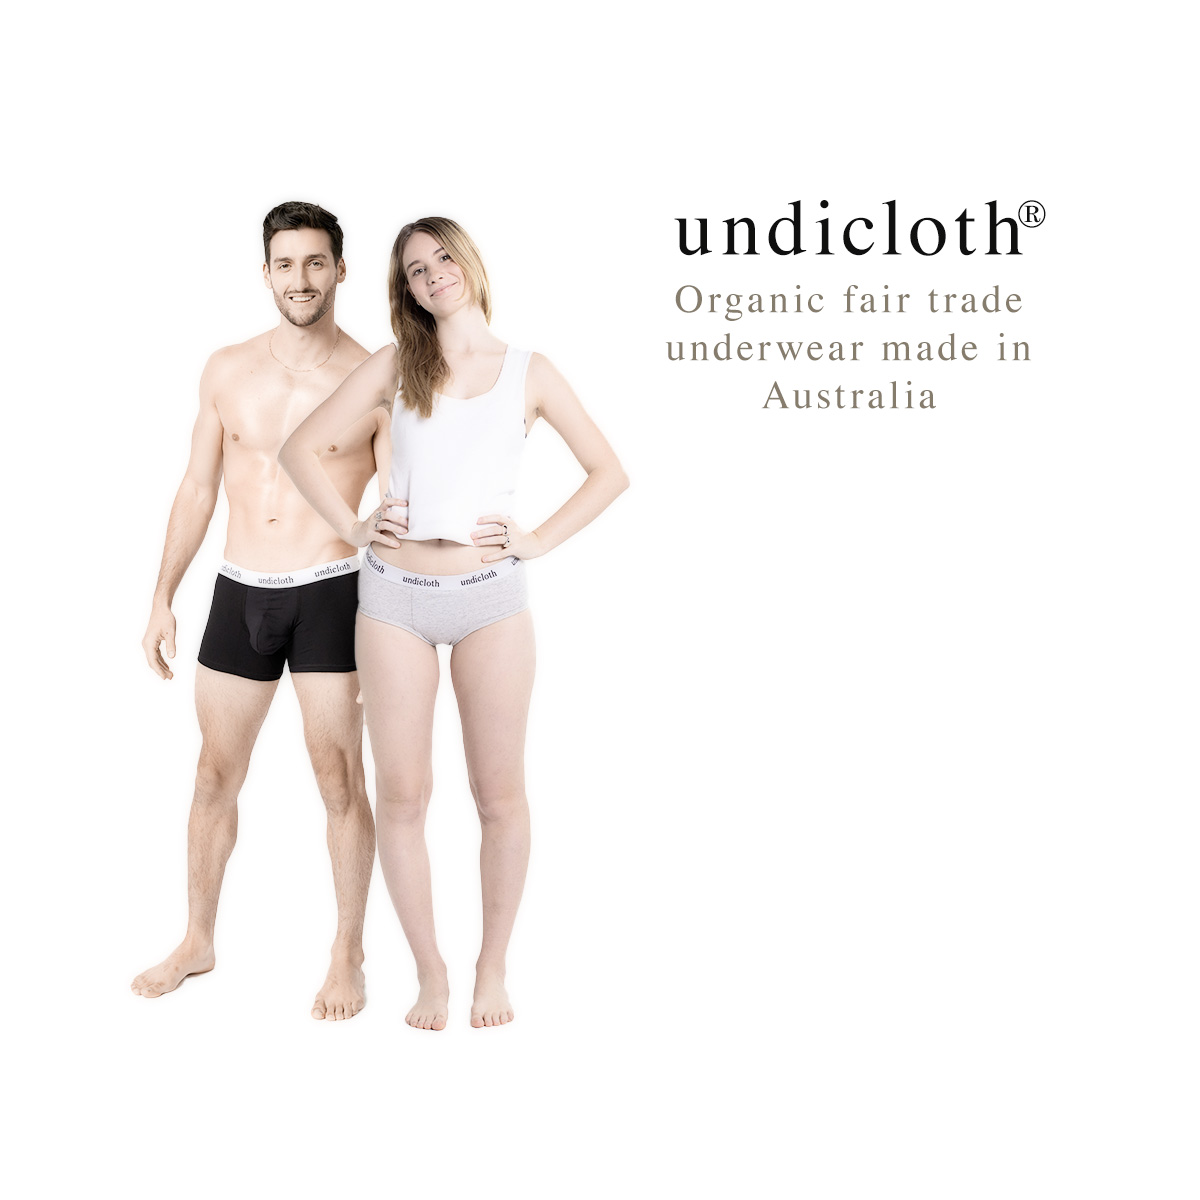 🌱🇦🇺 Our commitment to ethical fashion goes beyond just style. With undicloth® underwear, you not only get the perfect fit and comfort, but also the peace of mind knowing that they are made ethically right here in Australia.   #undicloth #sustainablefashion  #madeinaustralia